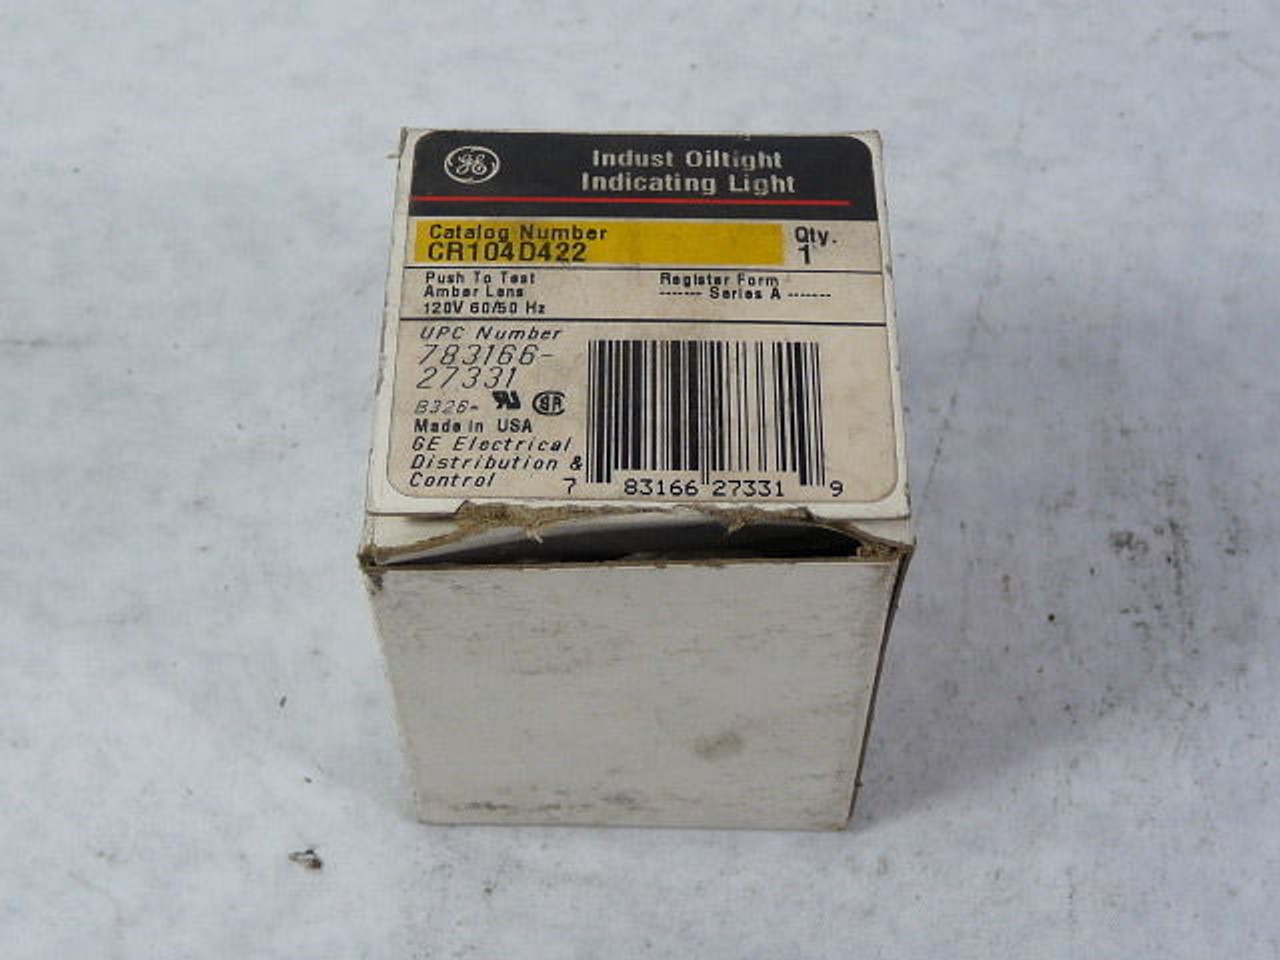 General Electric CR104D422 Oil Tight Indicating Light Amber Series A ! NEW !